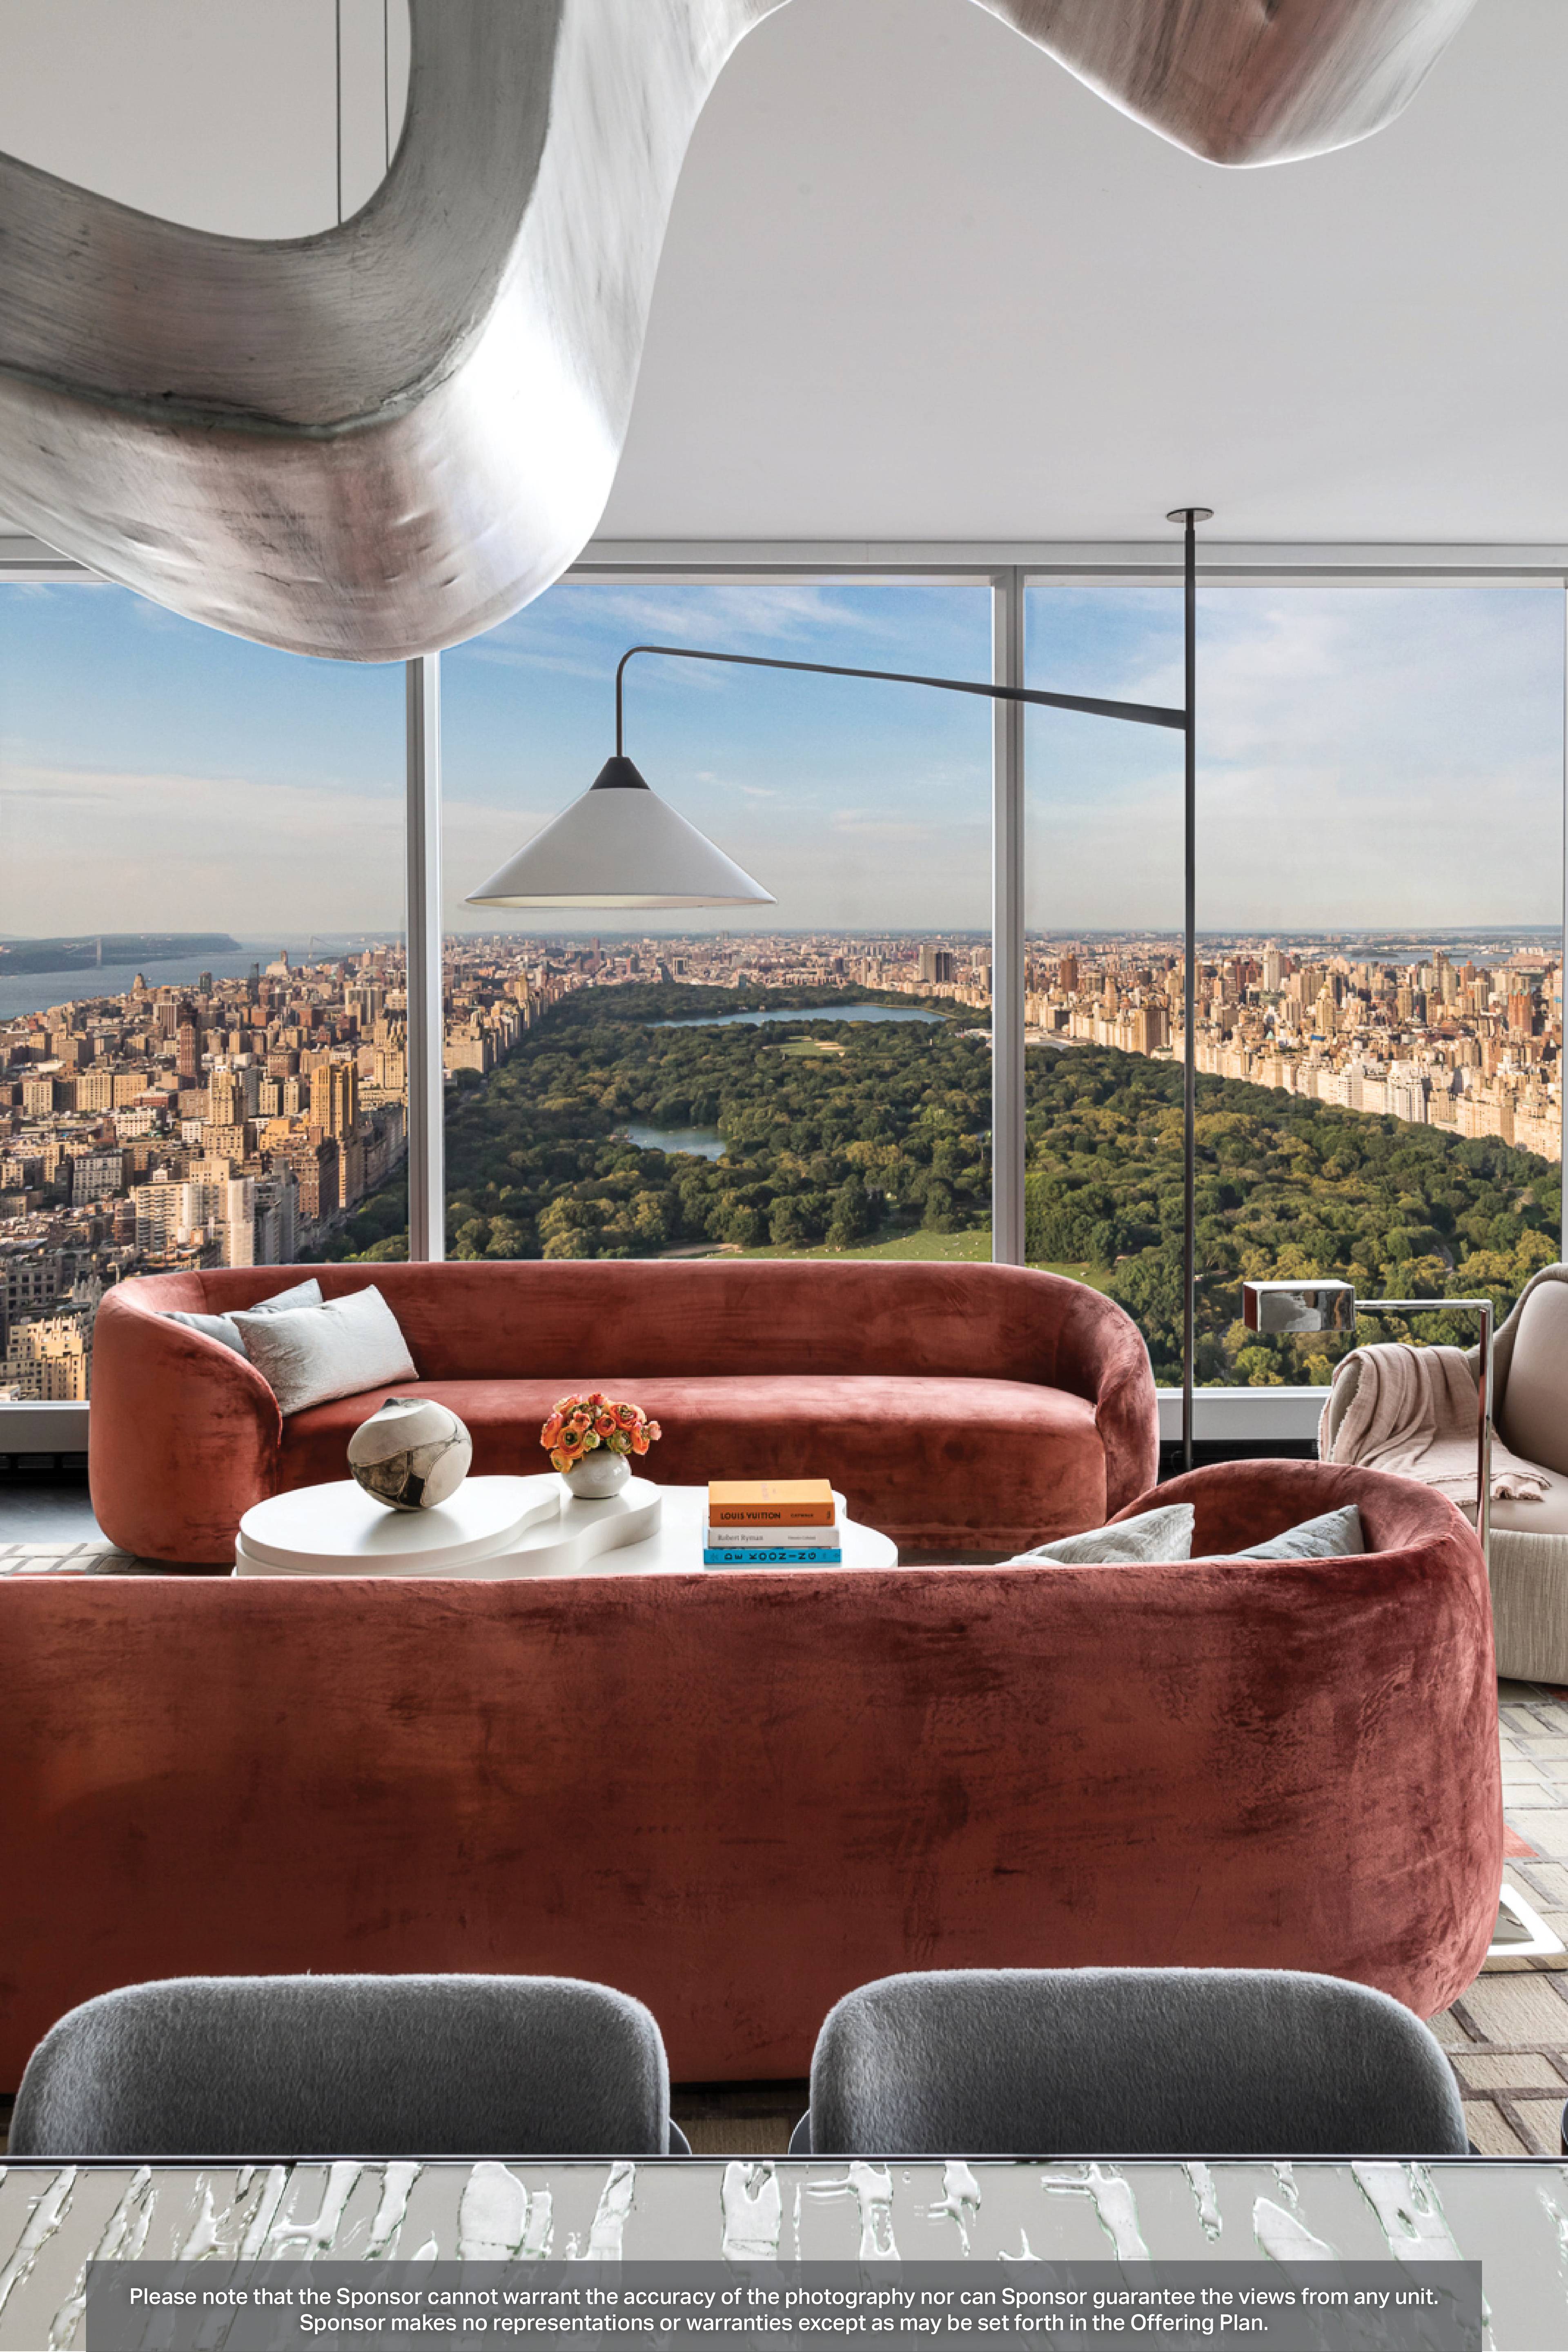 This corner three bedroom, three and a half bathroom residence is the most expansive three bedroom floor plan available within Central Park Tower.